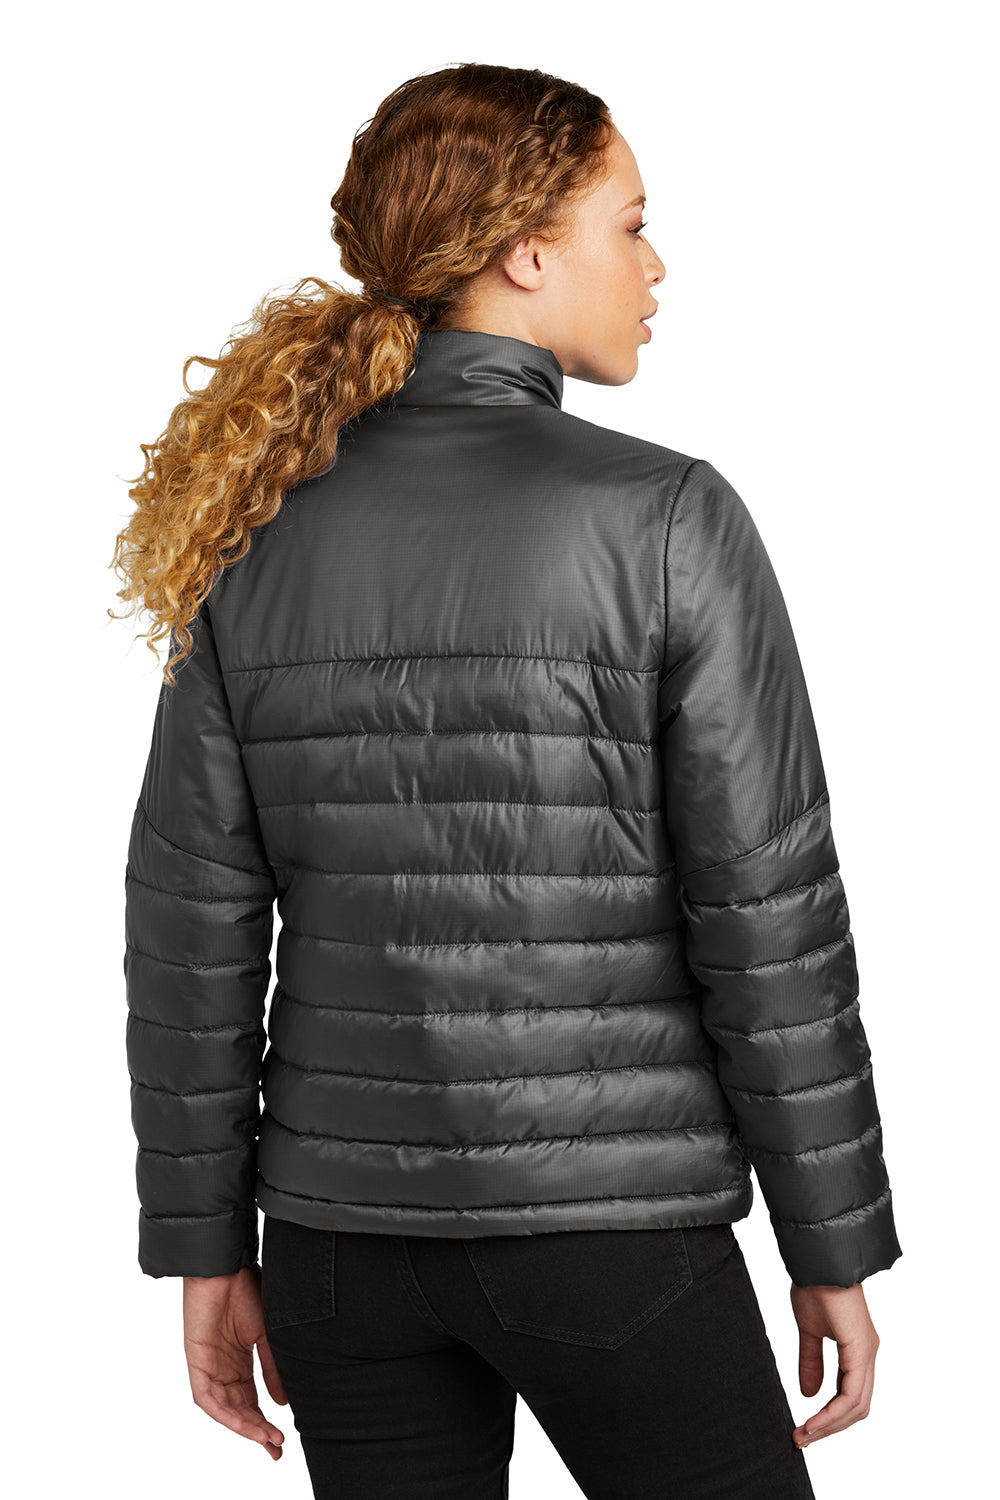 Eddie Bauer EB511 Womens Water Resistant Quilted Full Zip Jacket Iron Gate Grey Model Back